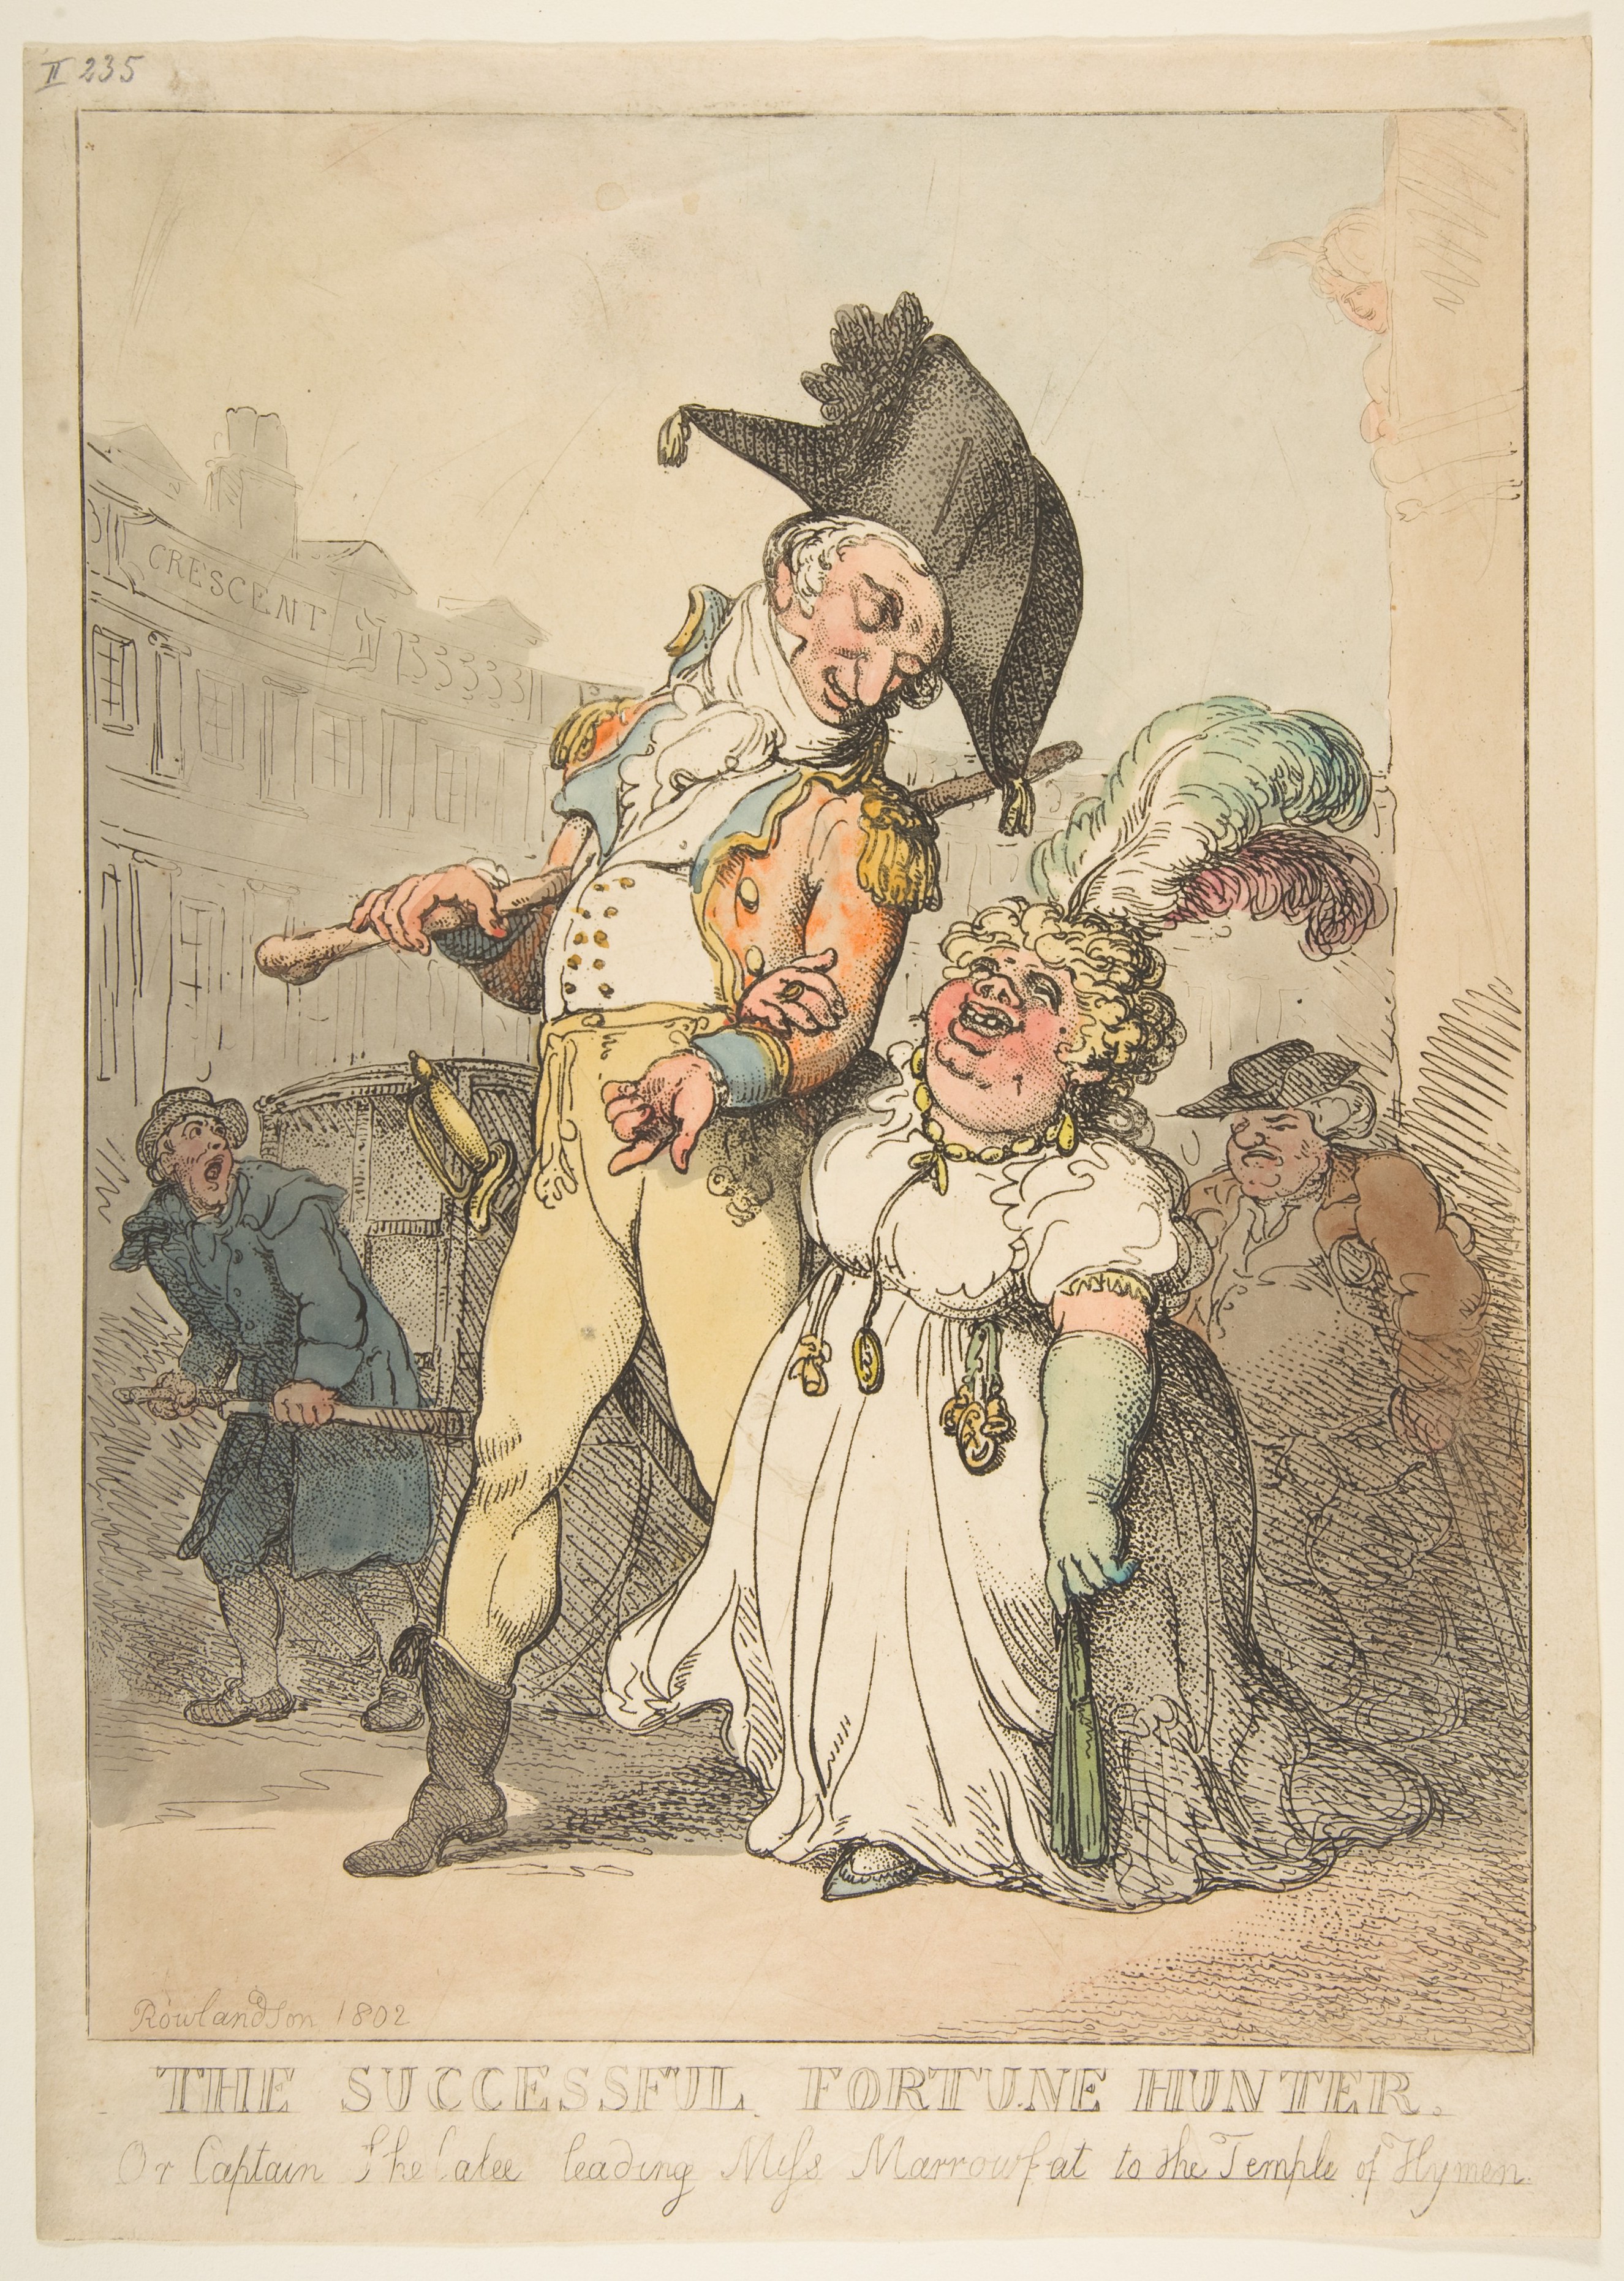 Thomas Rowlandson. The Successful Fortune Hunter, or Captain Shelalee Leading Miss Marrowfat to the Temple of Hymen, 1802.jpg